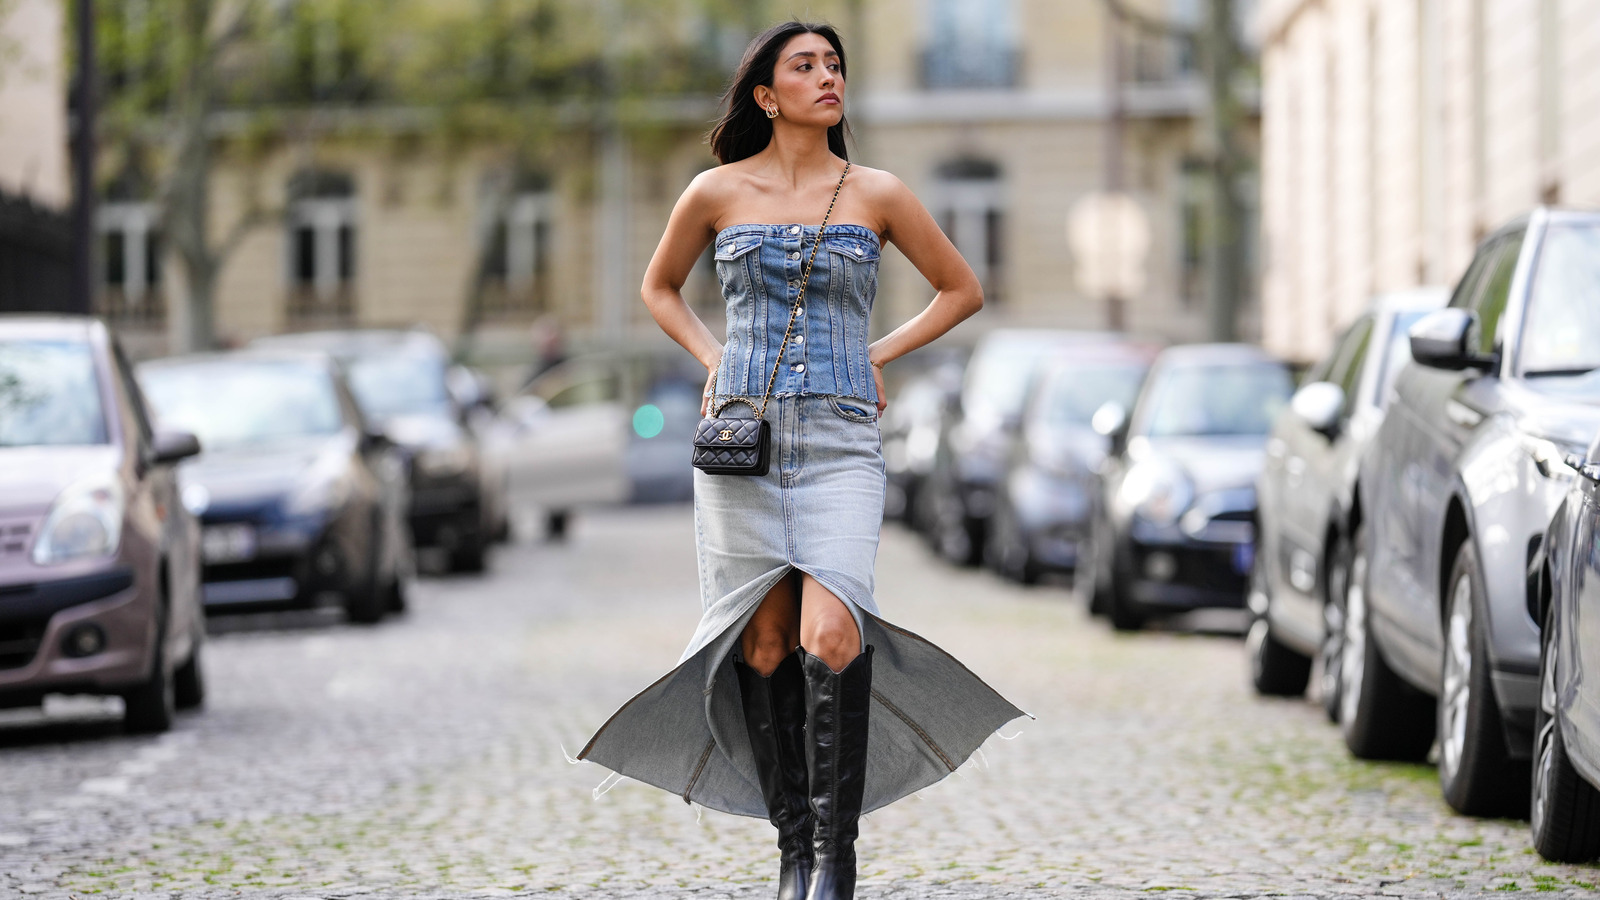 Denim Maxi Skirts Are In For Summer 2023, But How Do You Wear One